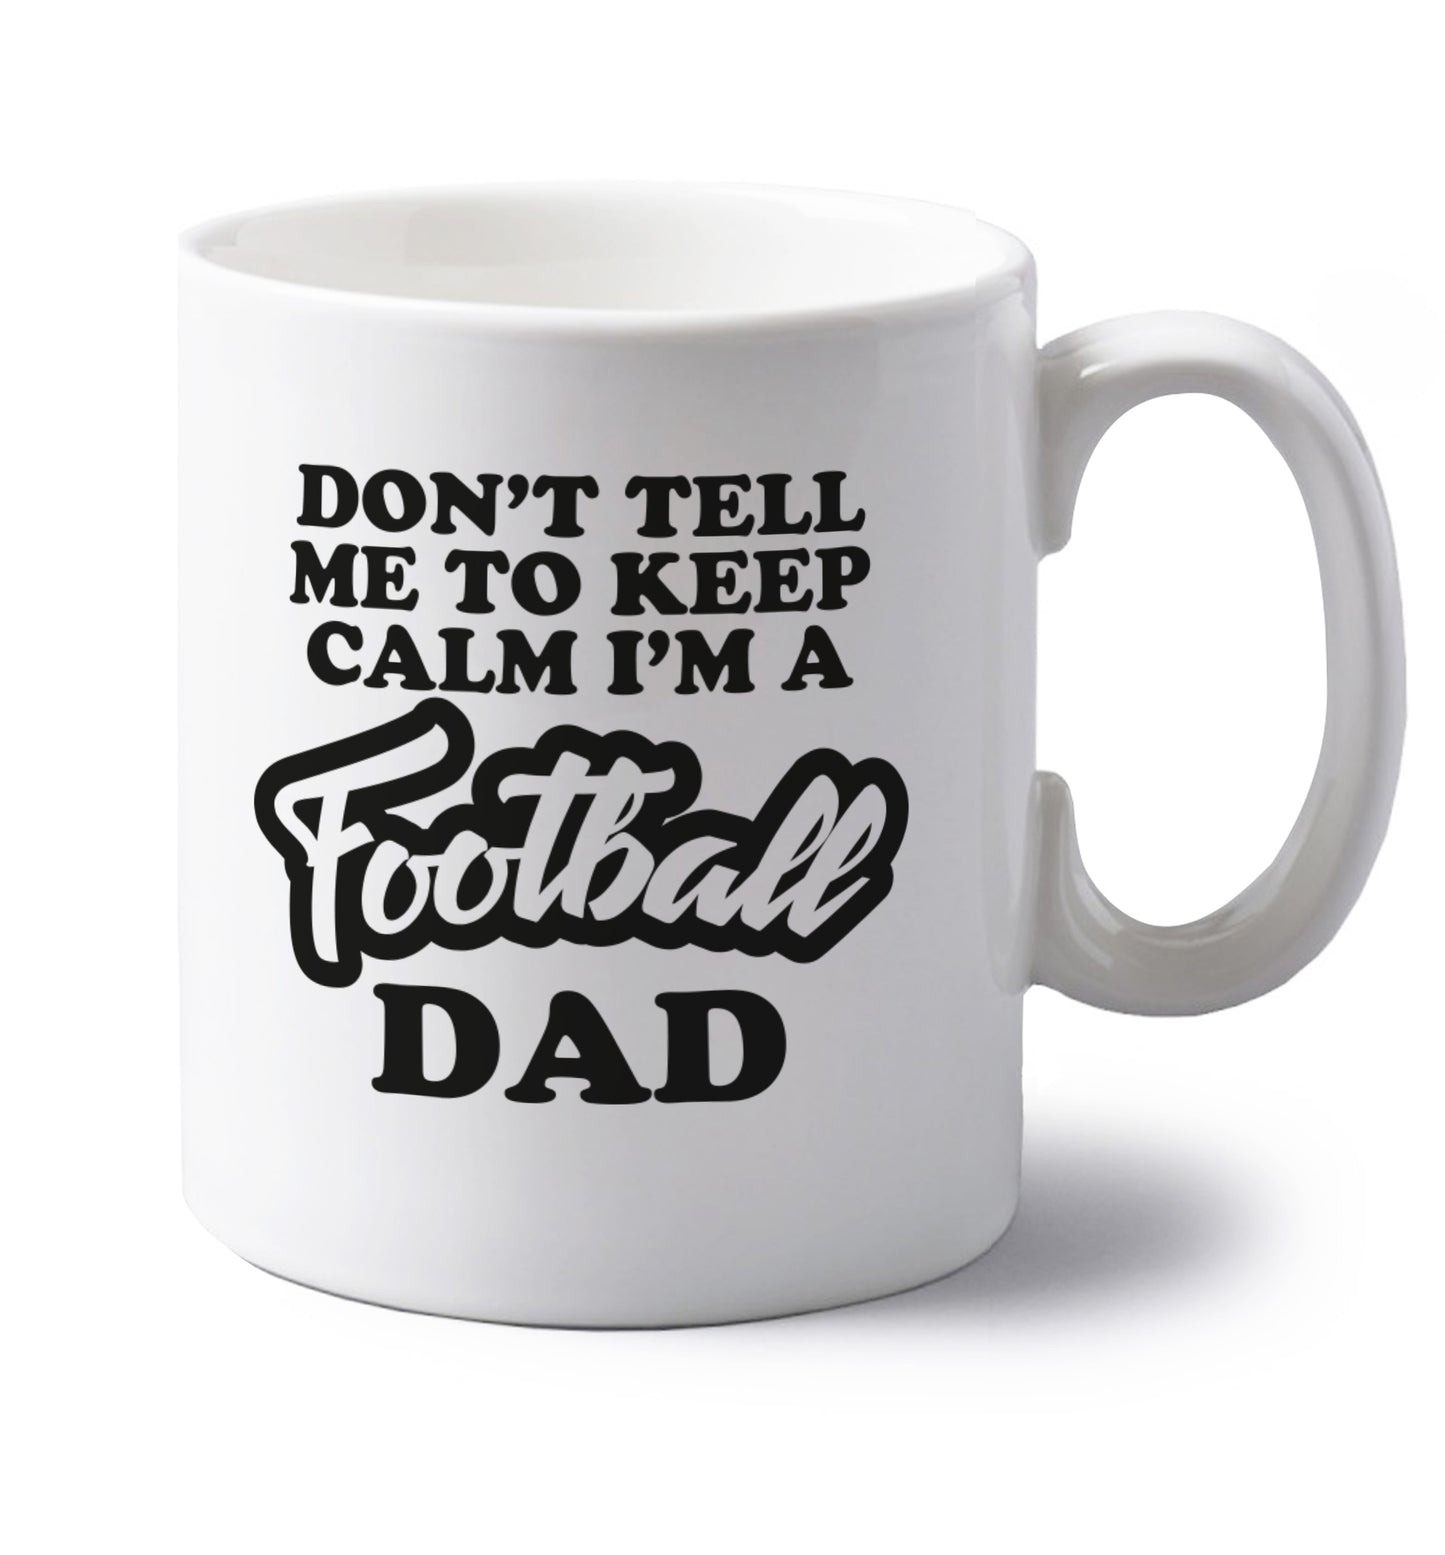 Don't tell me to keep calm I'm a football dad left handed white ceramic mug 